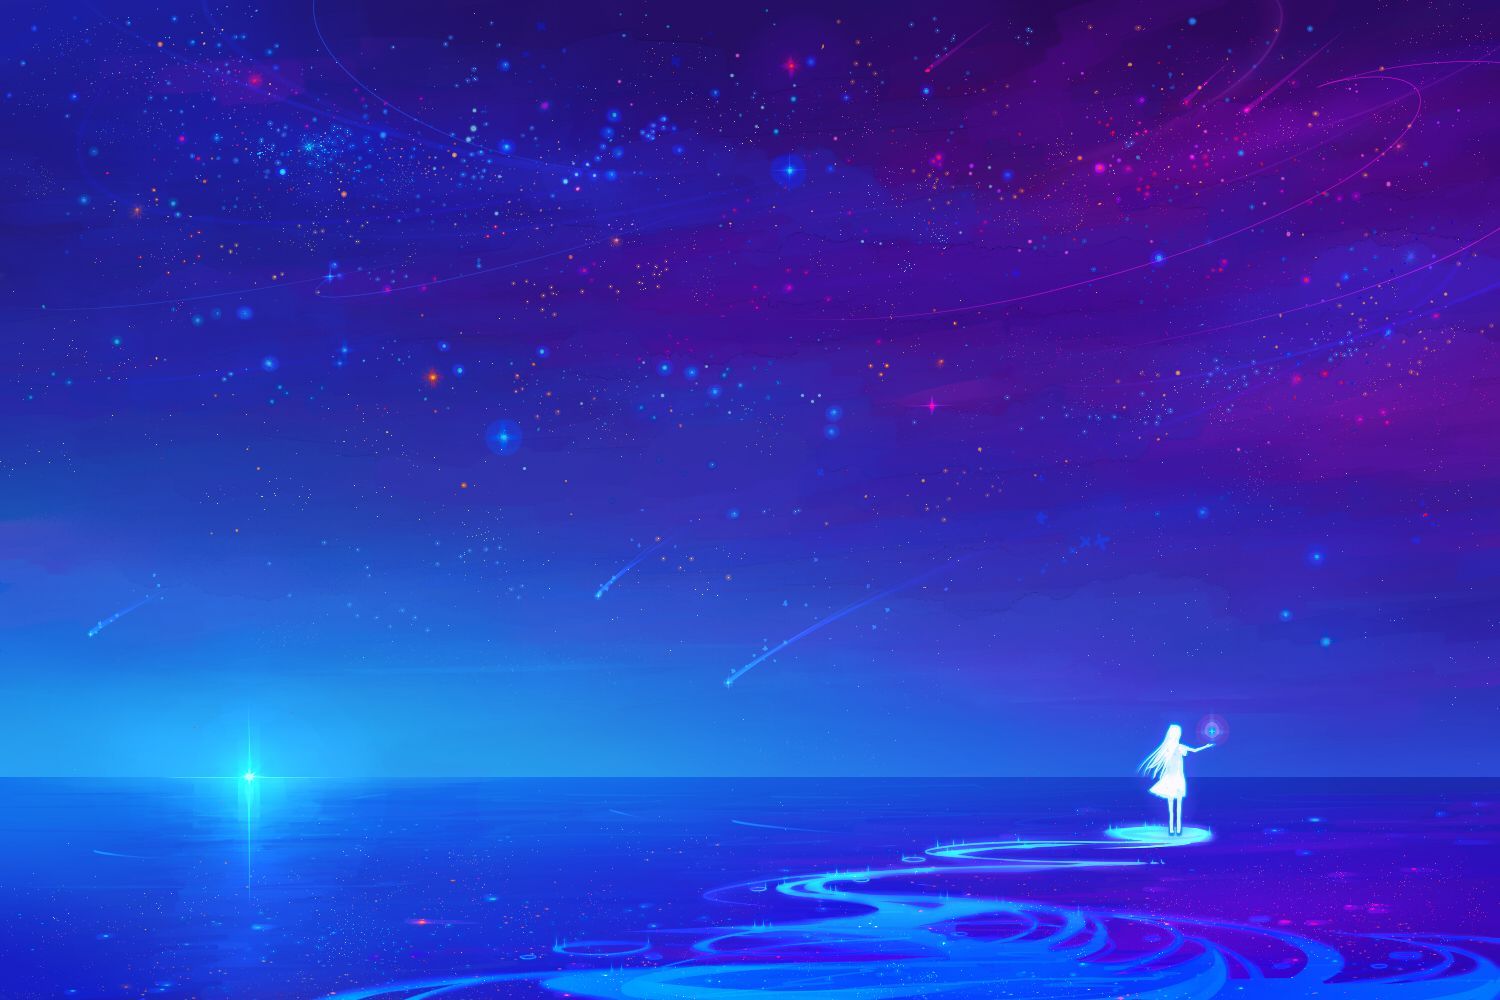 Free download Anime Night Sky wallpaper Virtual reality [1500x1000] for your Desktop, Mobile & Tablet. Explore Anime Sky Wallpaper. Anime Sky Wallpaper, Sky Wallpaper, Sky Background